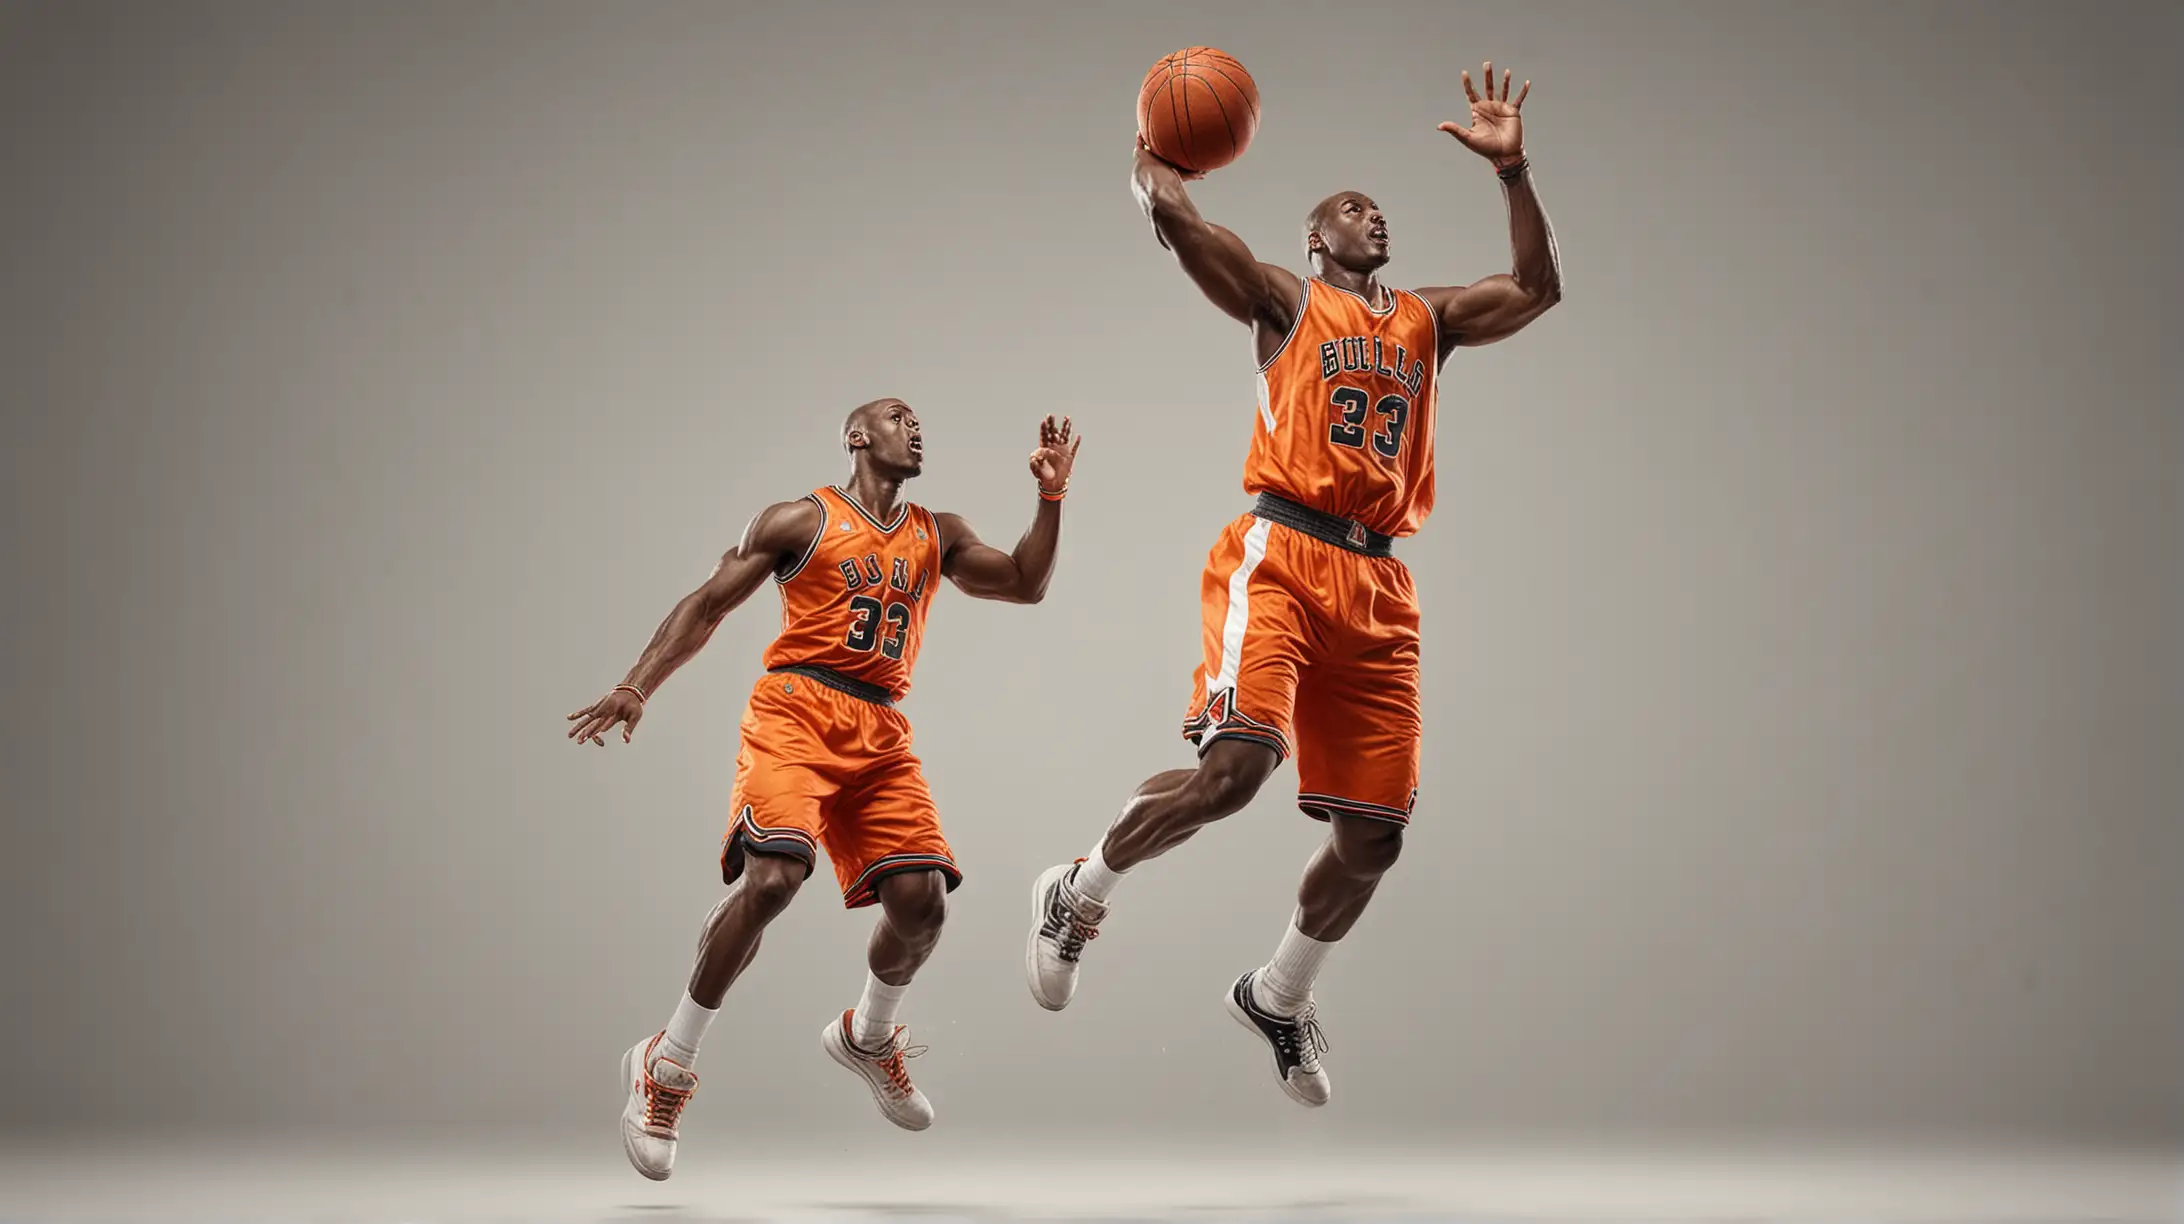 realistic basketball player jumping up with basketball, isolated on white background, orange uniform, michael Jordan style